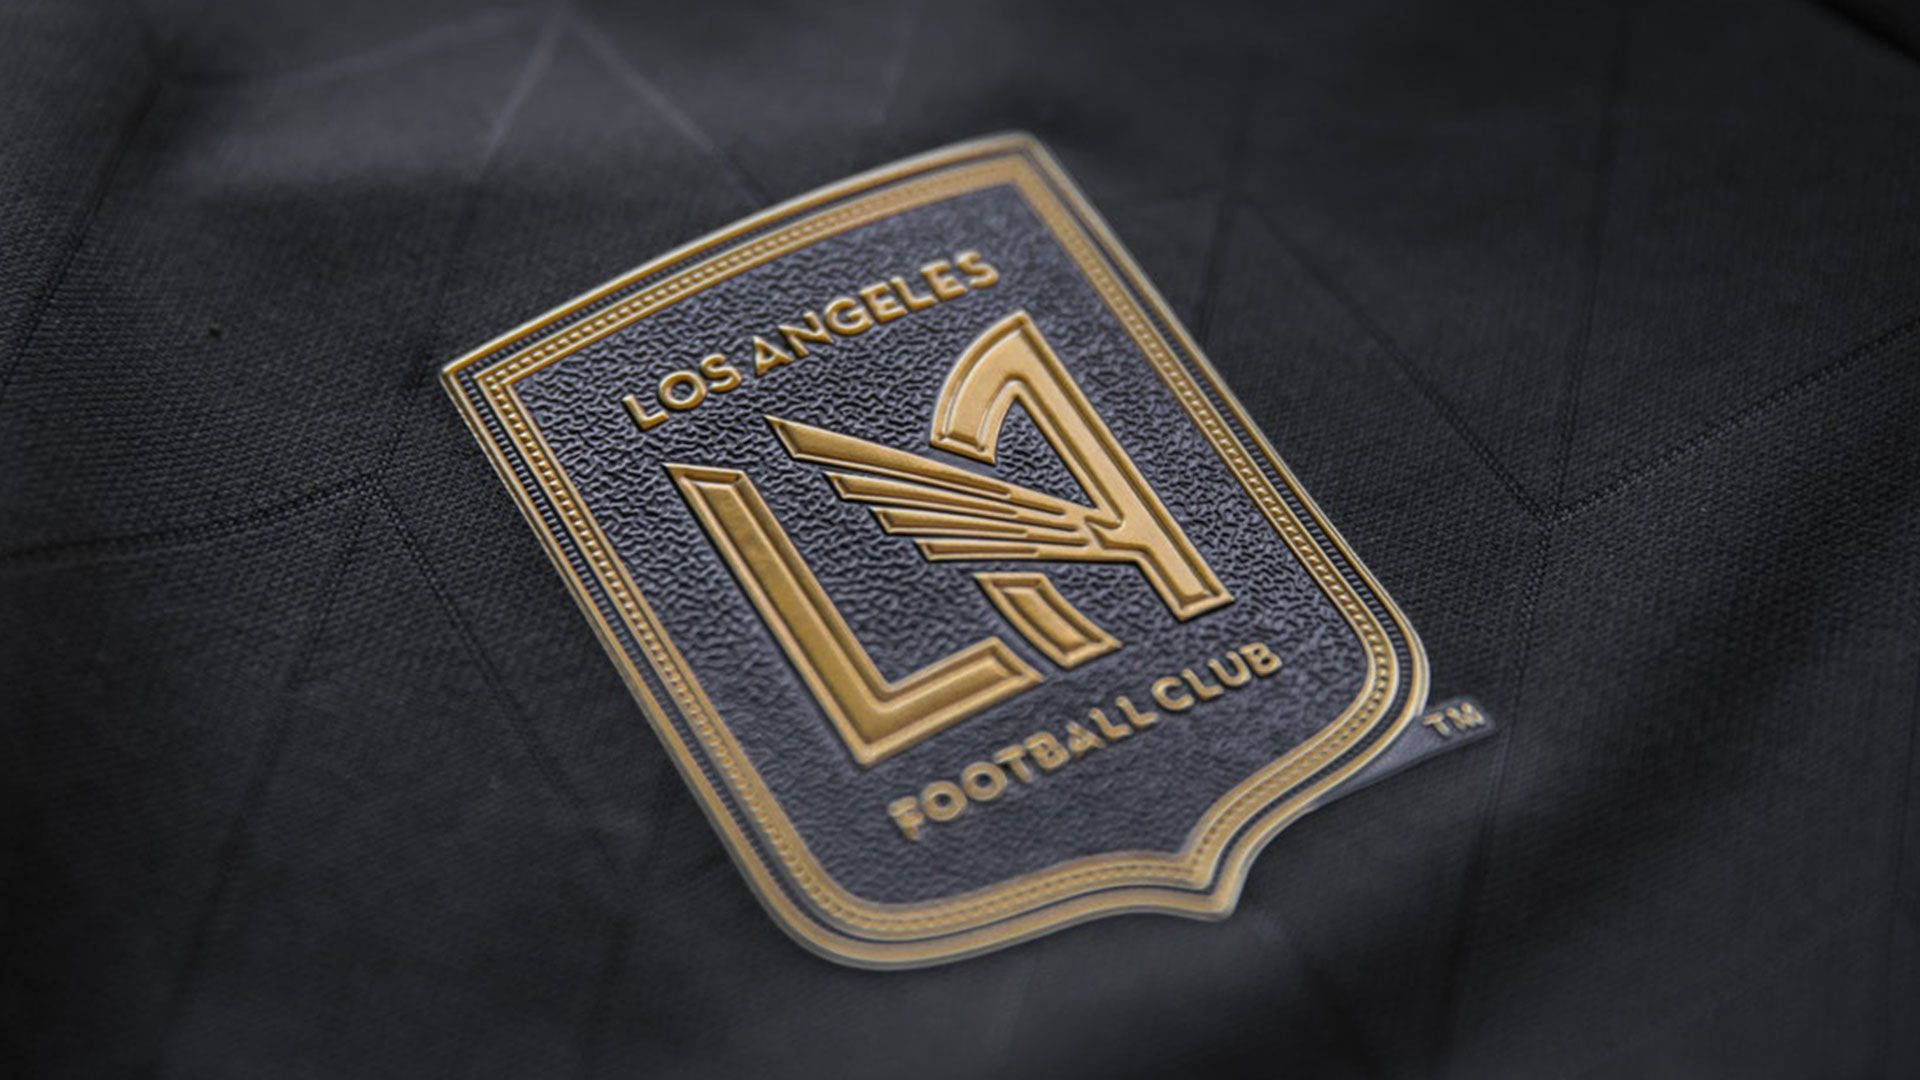 Lafc Patch Background